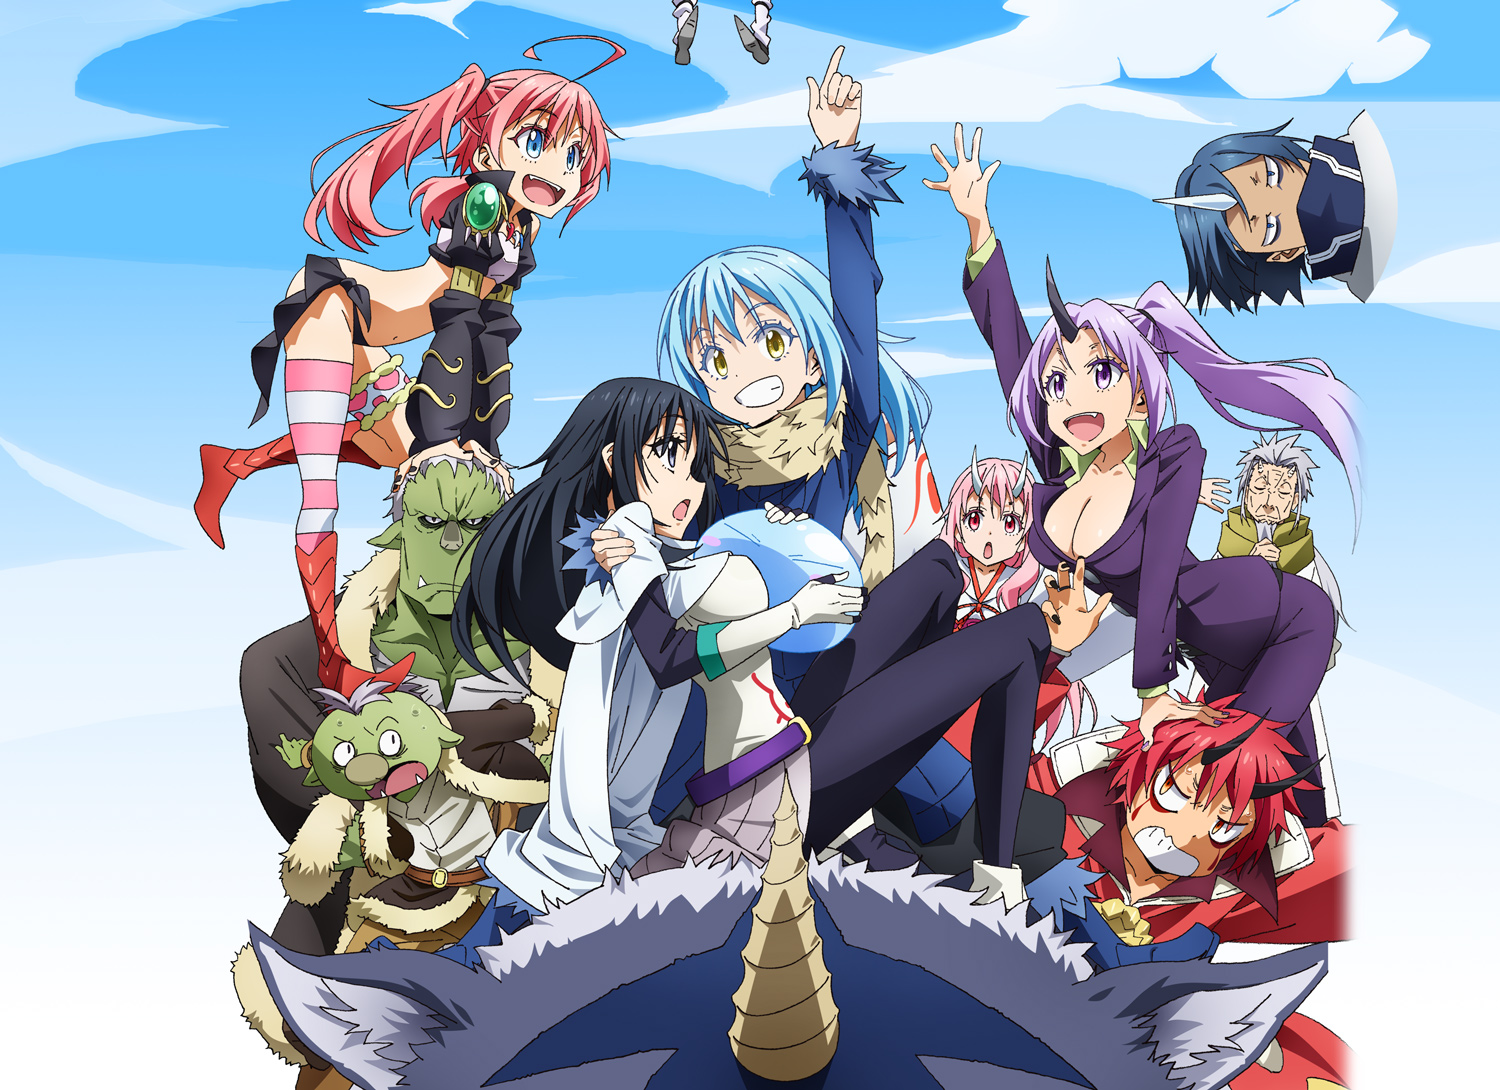 That Time I Got Reincarnated as a Slime Season 2 Episode 7: Release Date & Spoilers